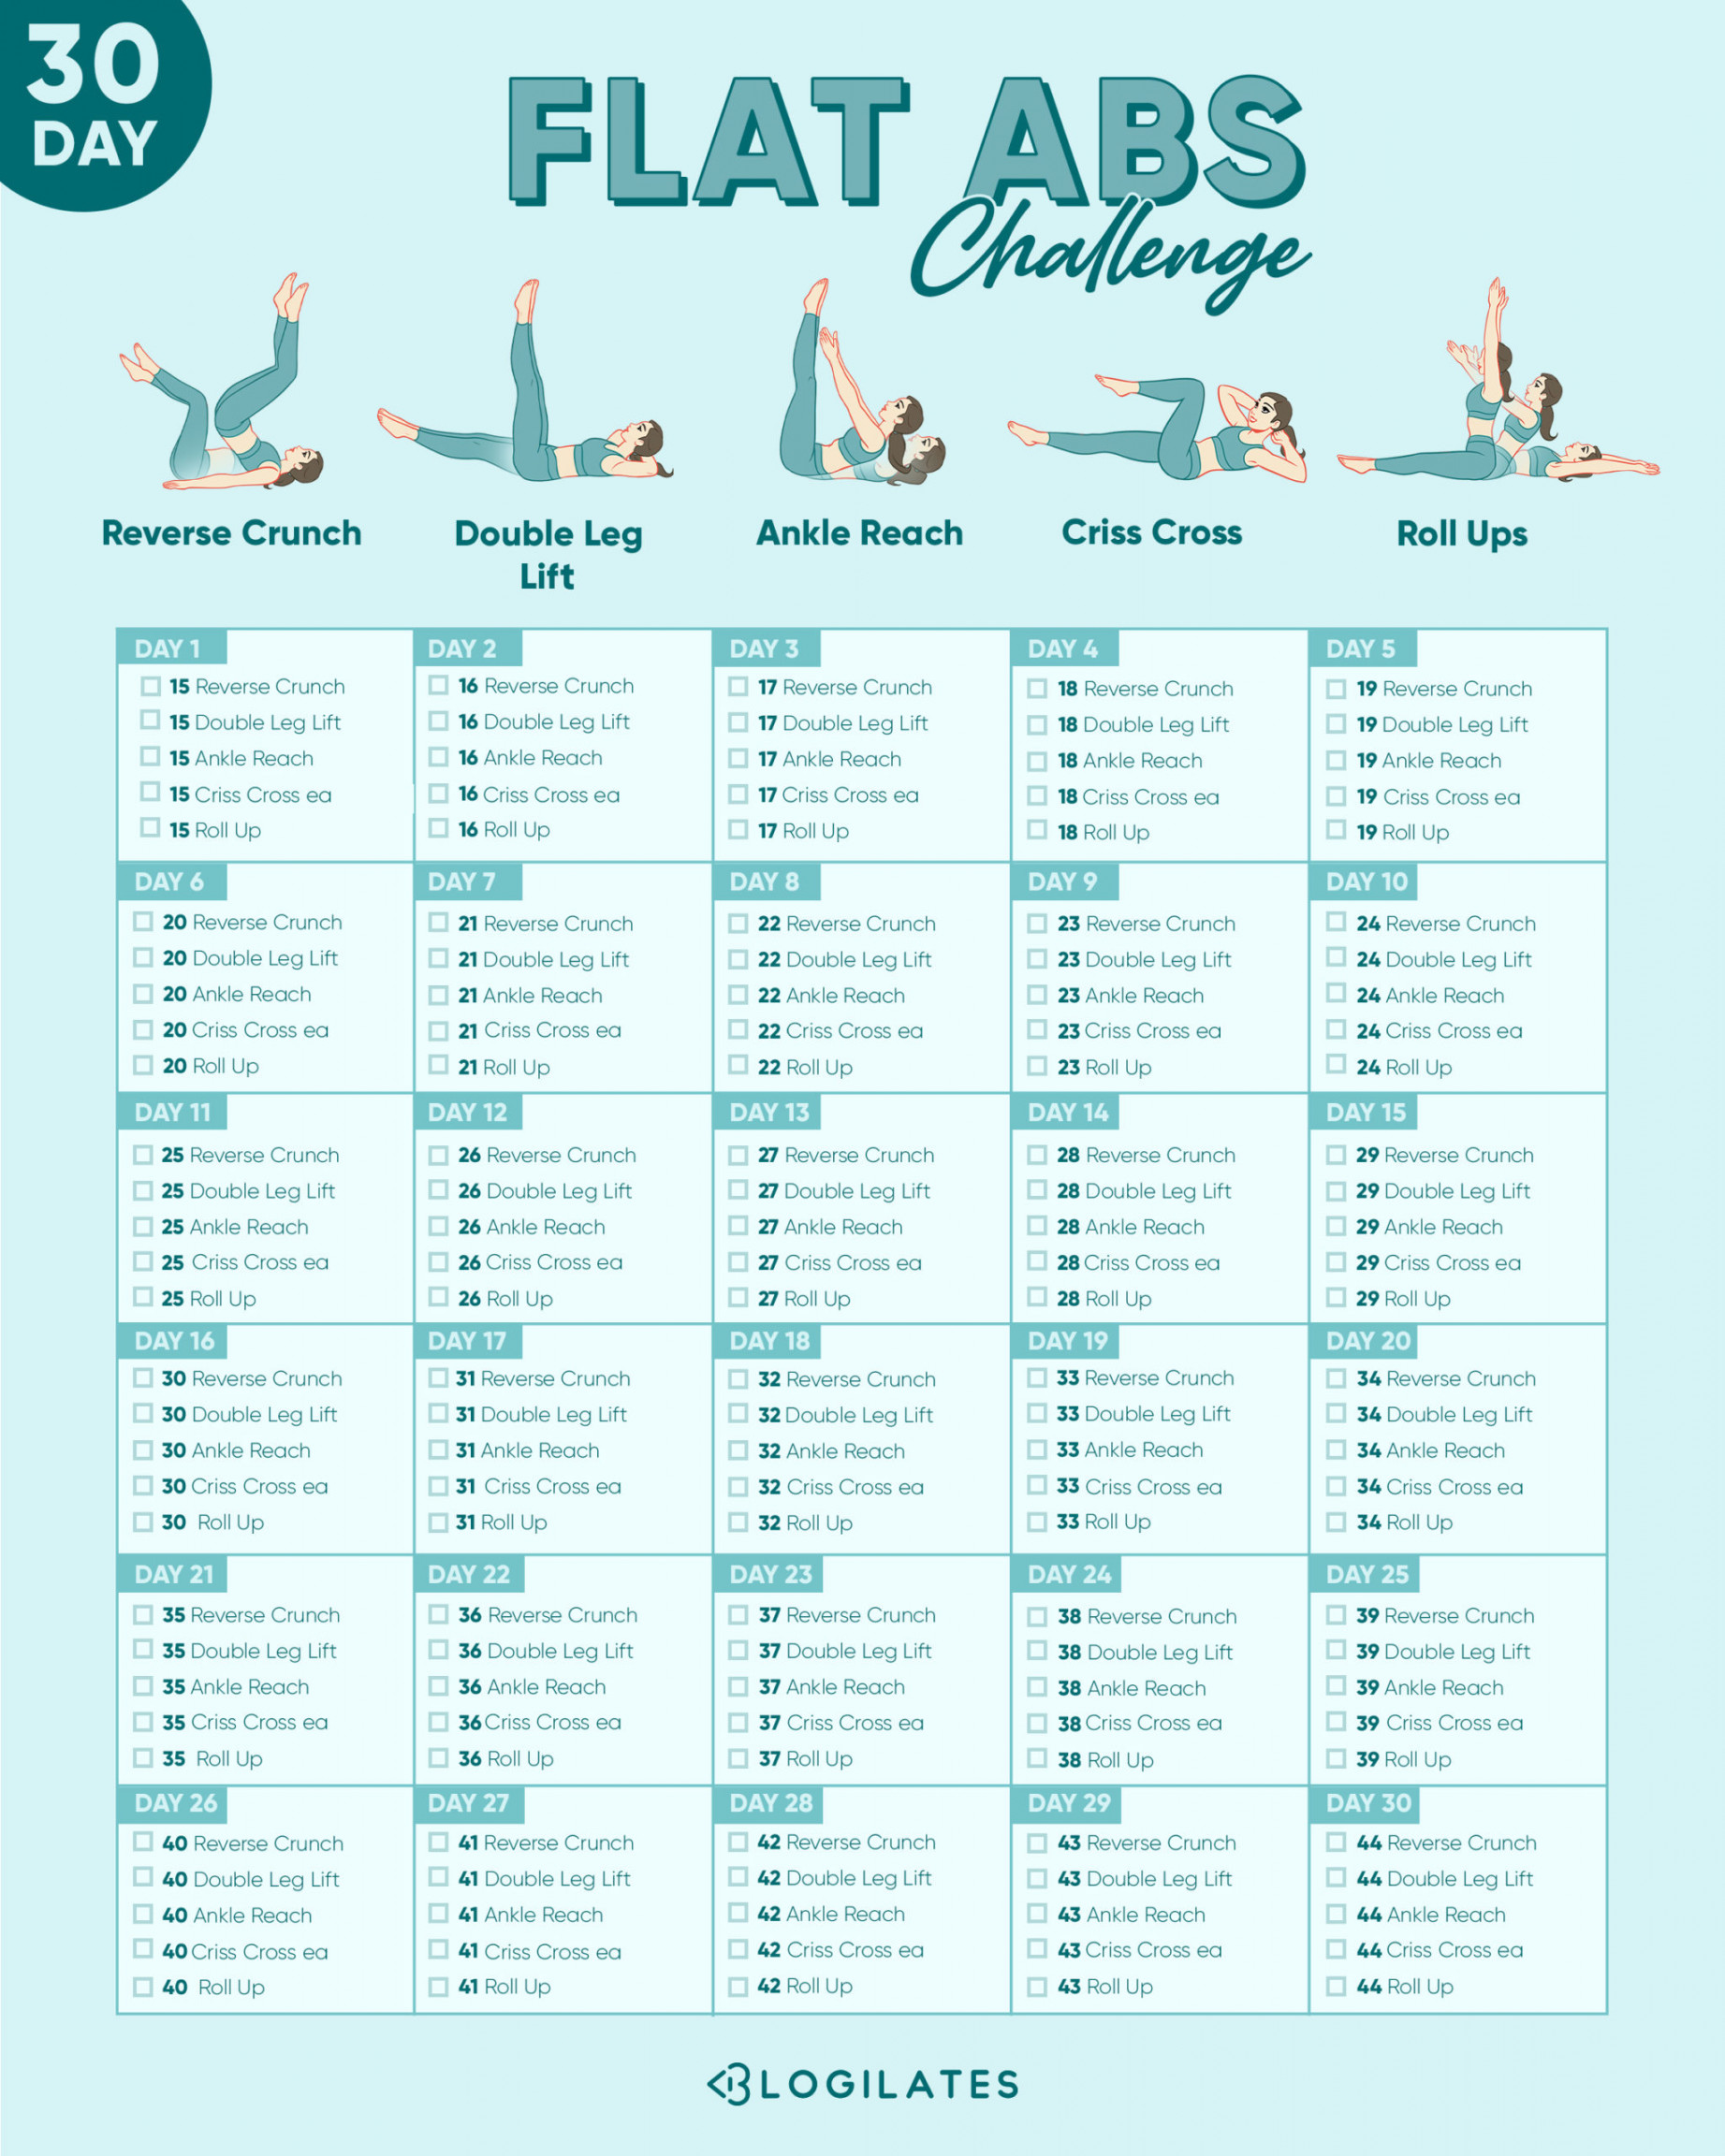 Day Flat Abs Challenge! - Blogilates